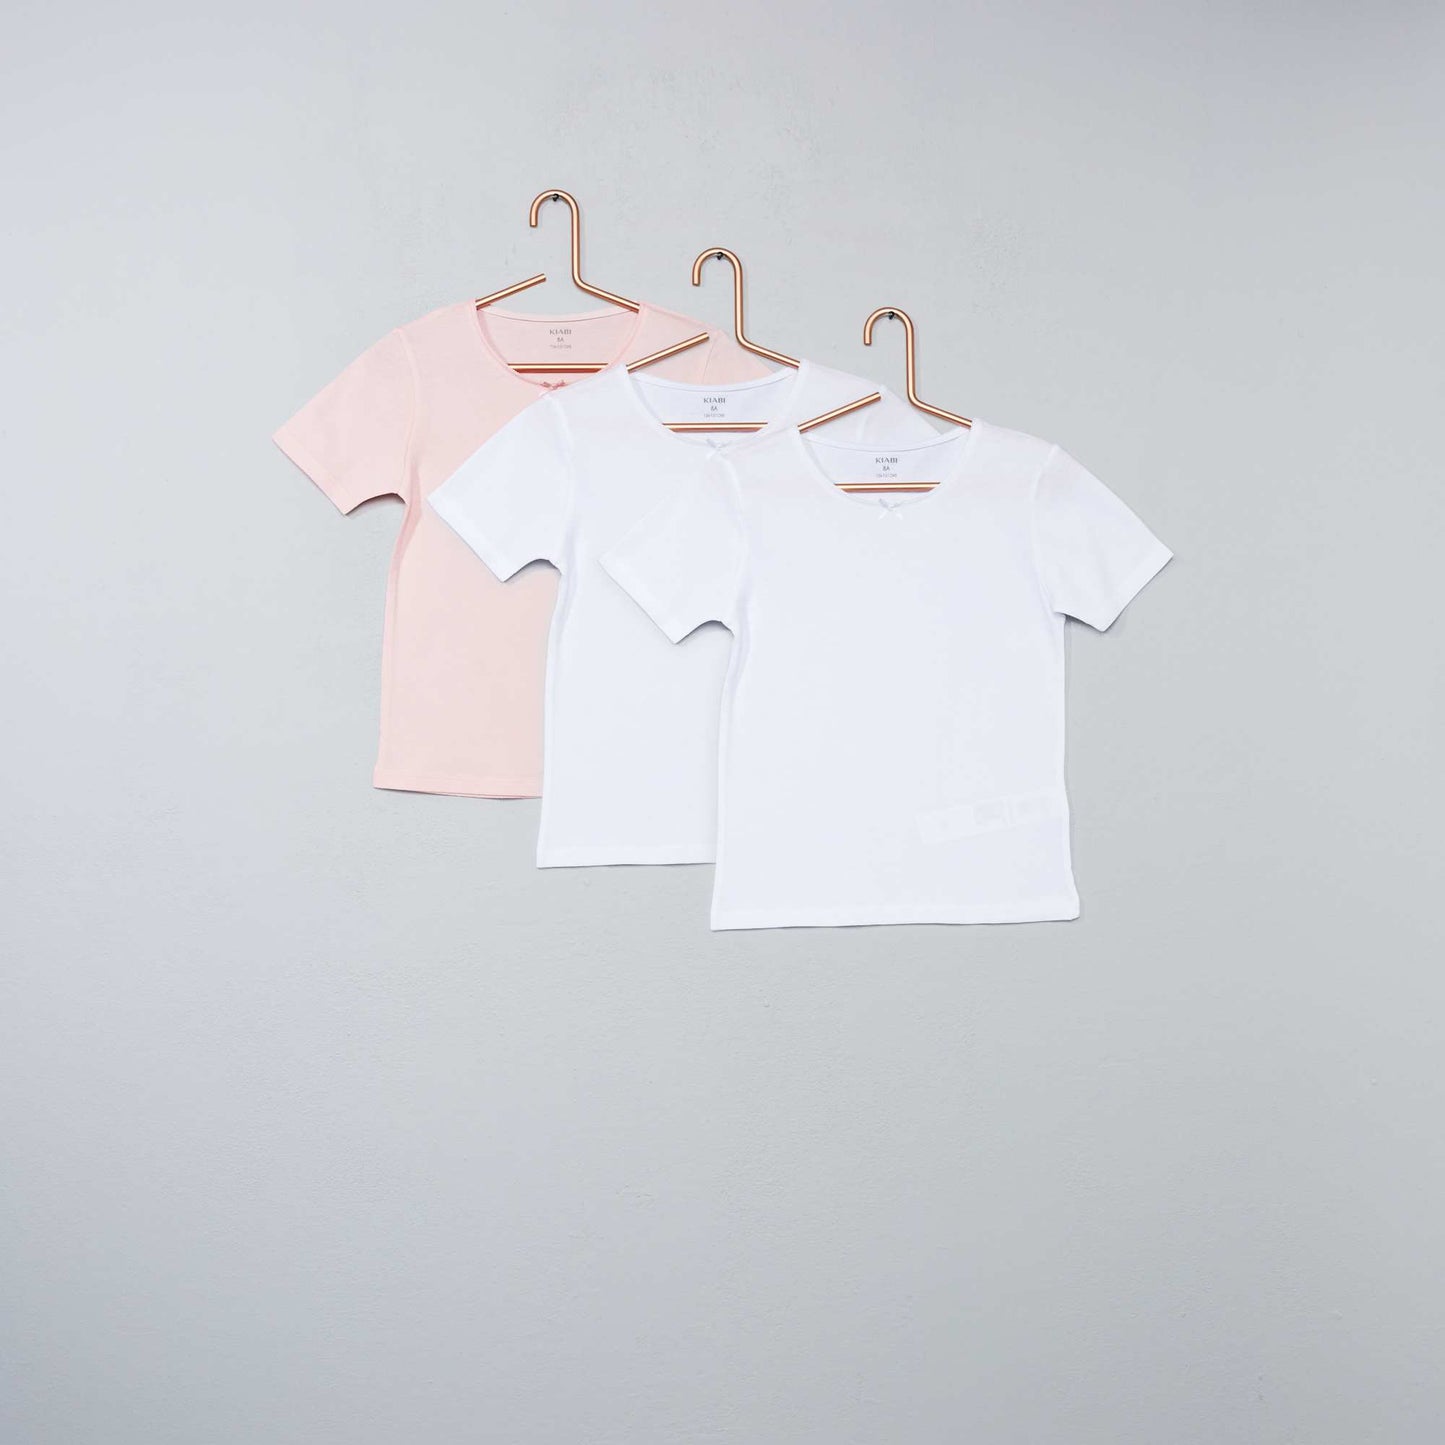 Pack of 3 block colour T-shirts white/pink